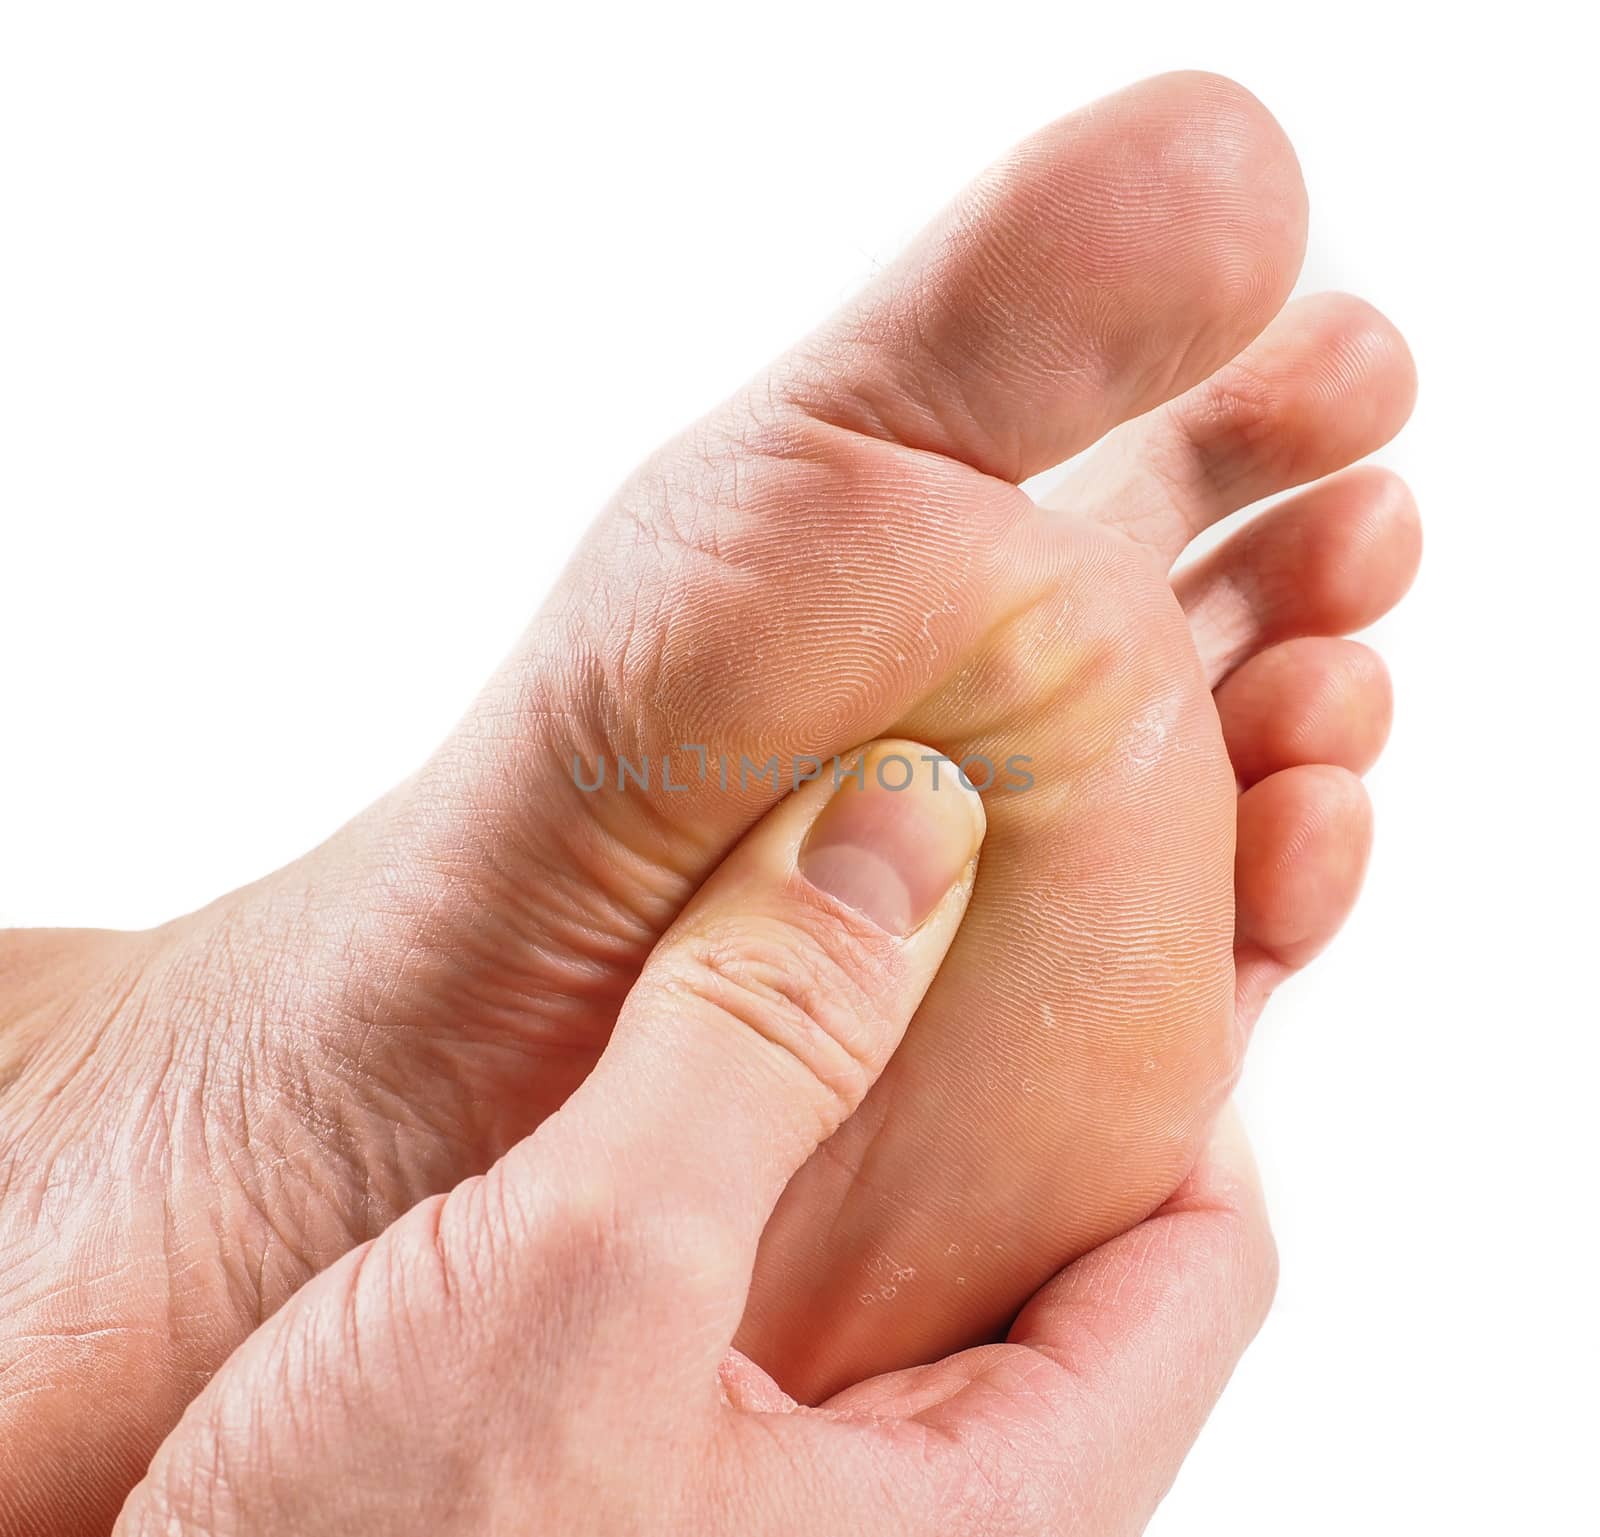 Male person receiving podiatry with pressure point technique by Arvebettum